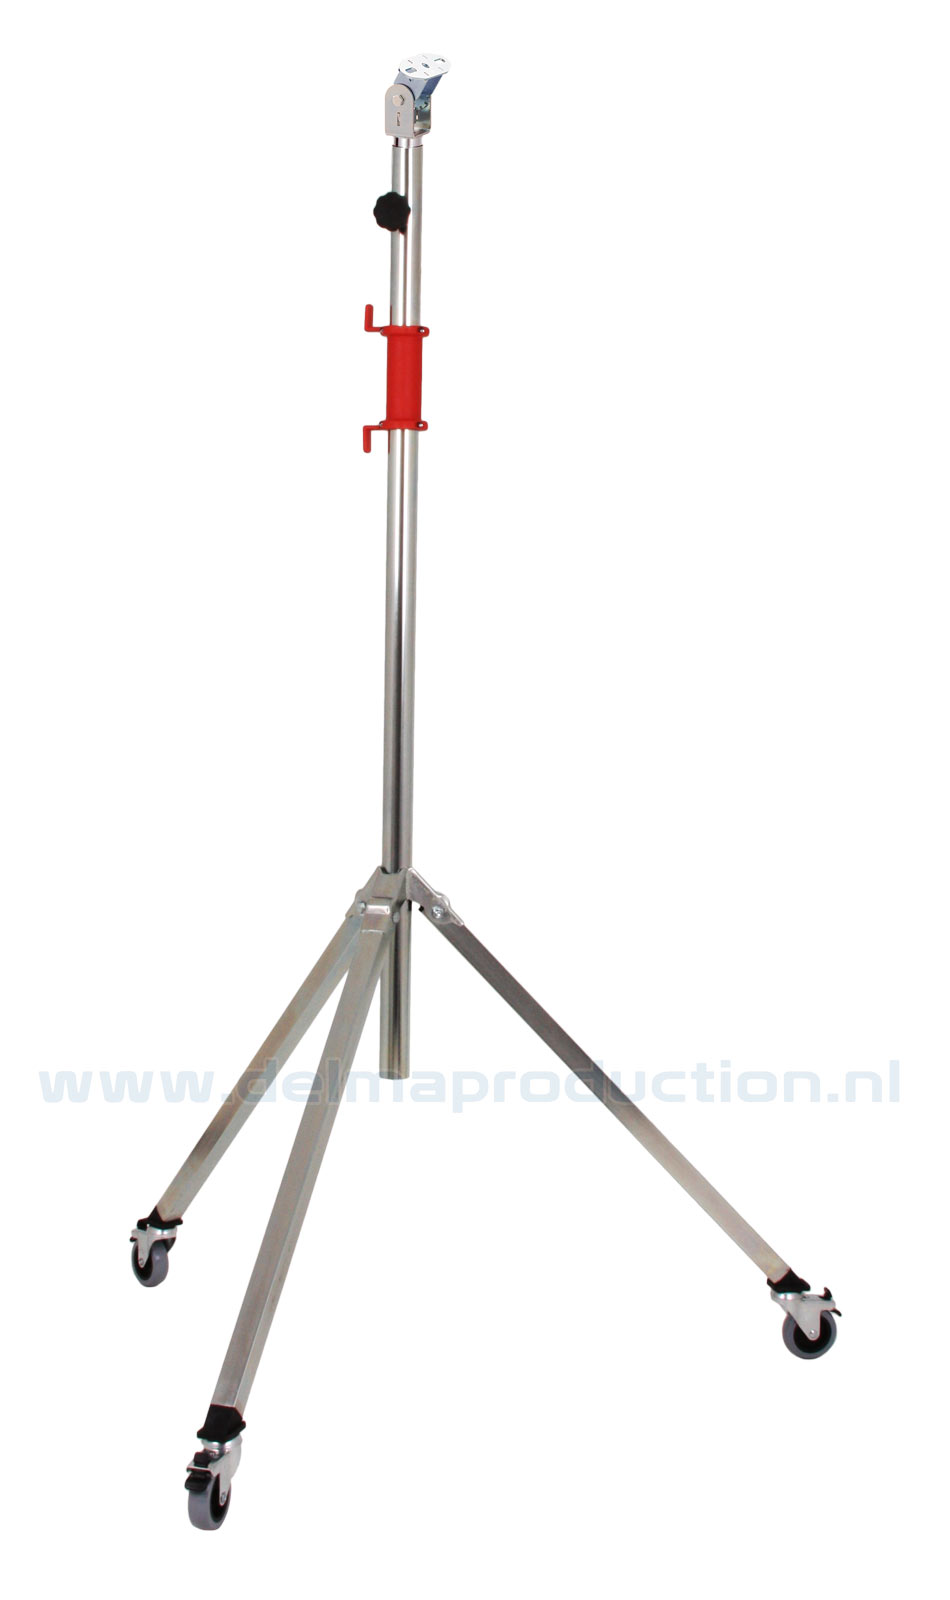 Tripod worklight stand 2-part, mobile, quick adjustment